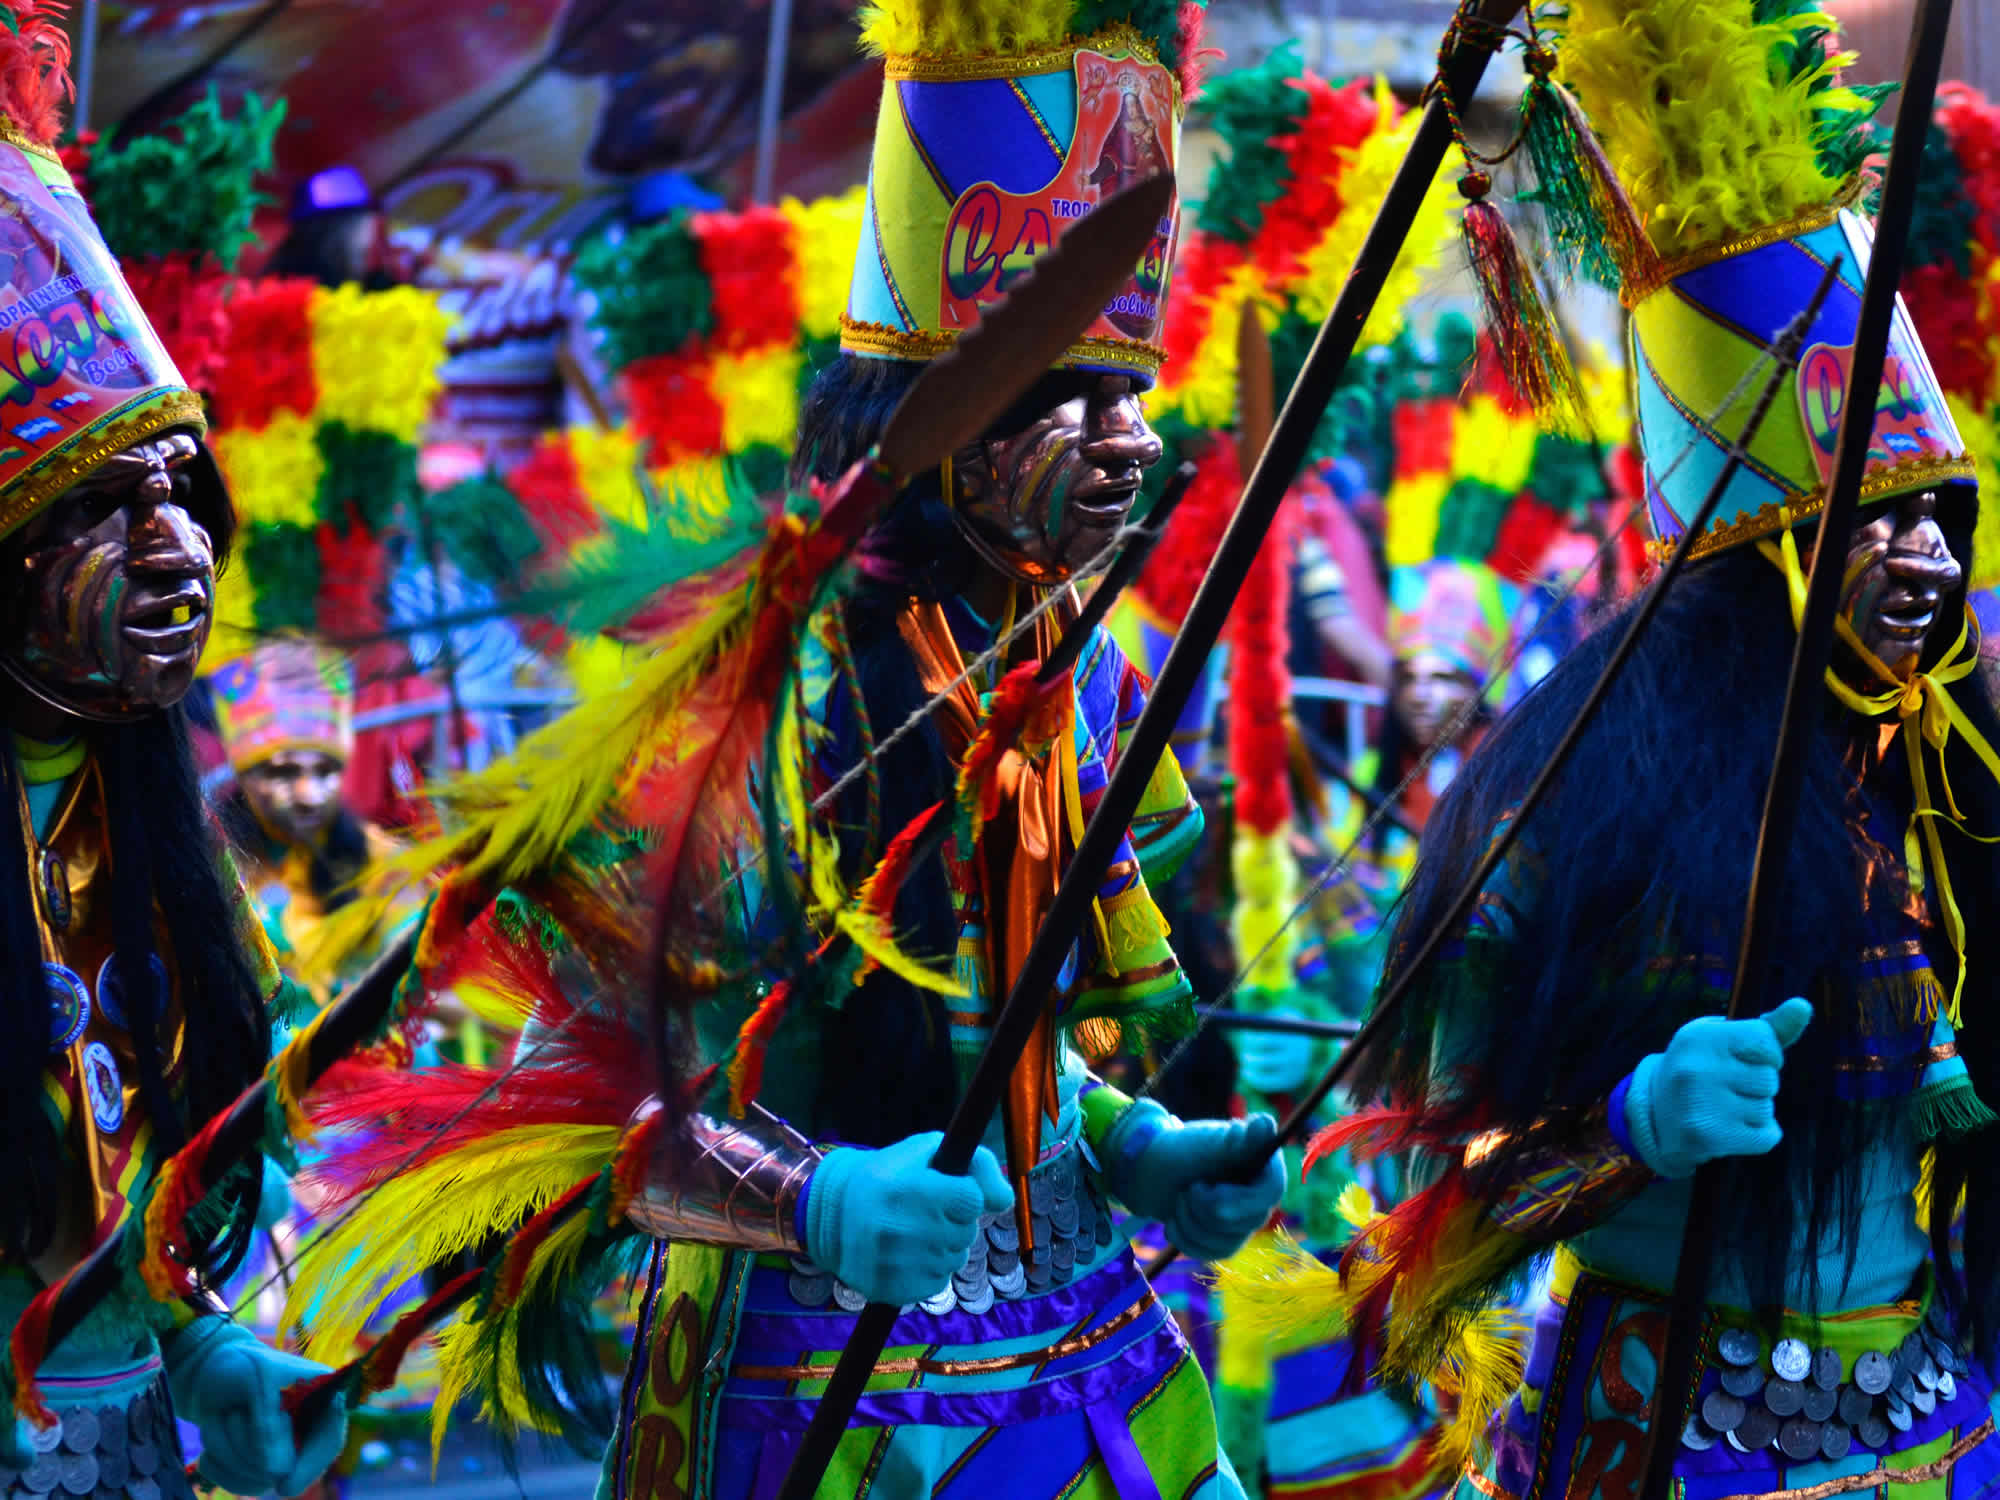 Tobas Dance at the Oruro Carnival